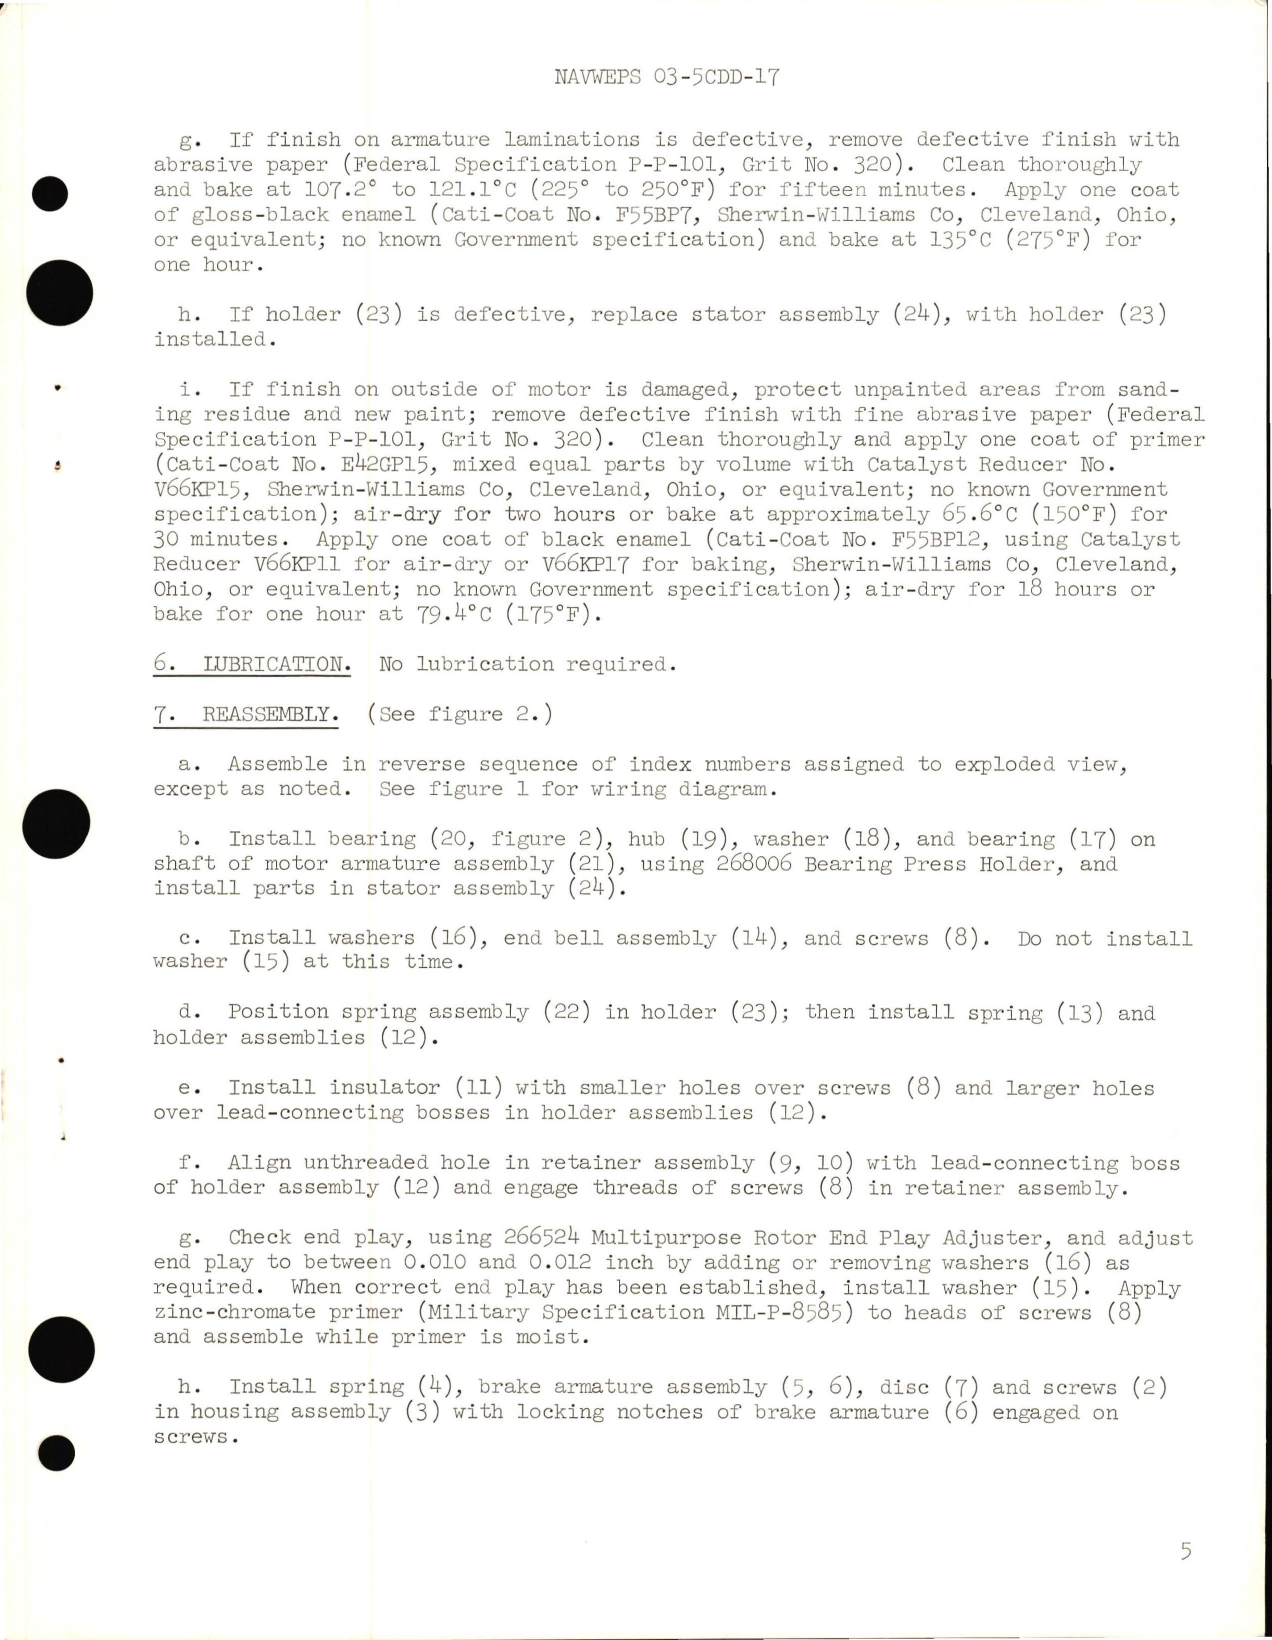 Sample page 5 from AirCorps Library document: Overhaul Instructions with Parts Breakdown for Aircraft Direct Current Motor - Part 36843-2-1